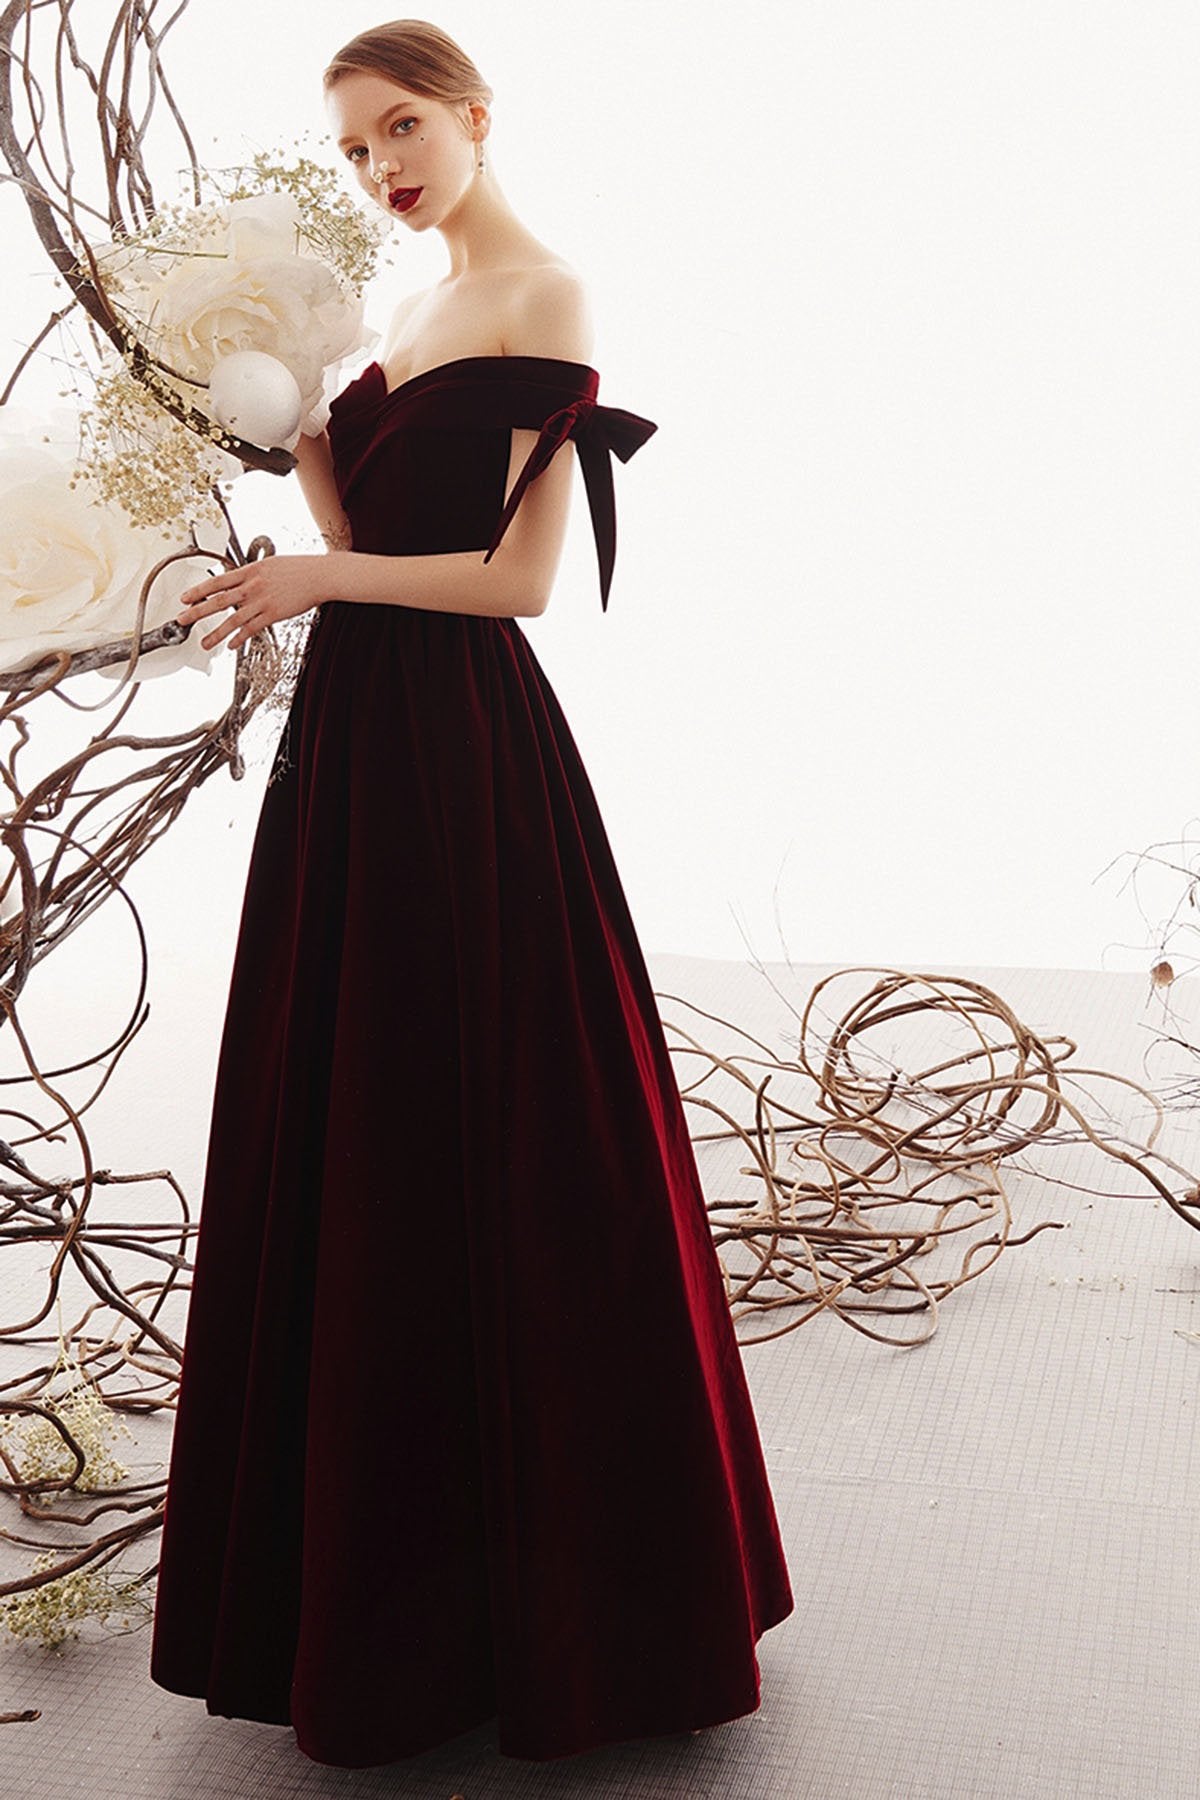 Charming A Line Long Off the Shoulder Burgundy V Neck Prom Dresses with Sweetheart STC15089